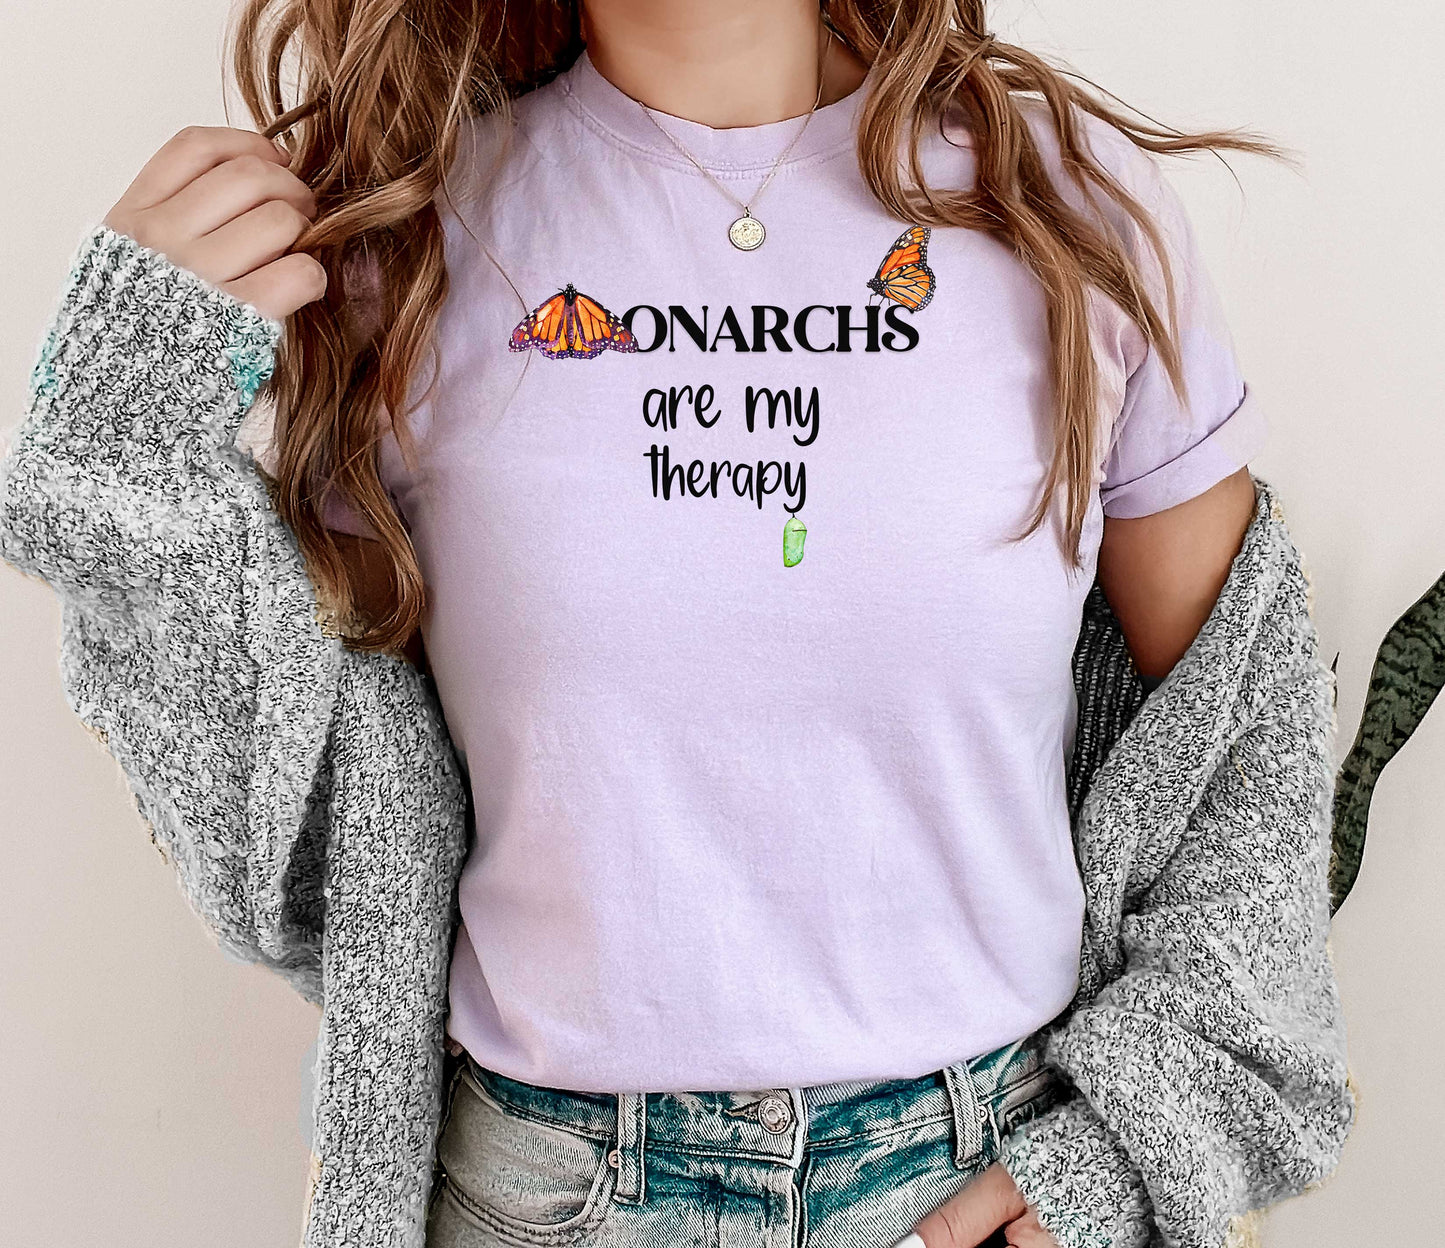 Monarchs are my Therapy Unisex T-shirt, Nature Lover's Gift, Comfort Tee, Butterfly Art Shirt, Conservation, Environmental Cause Shirt